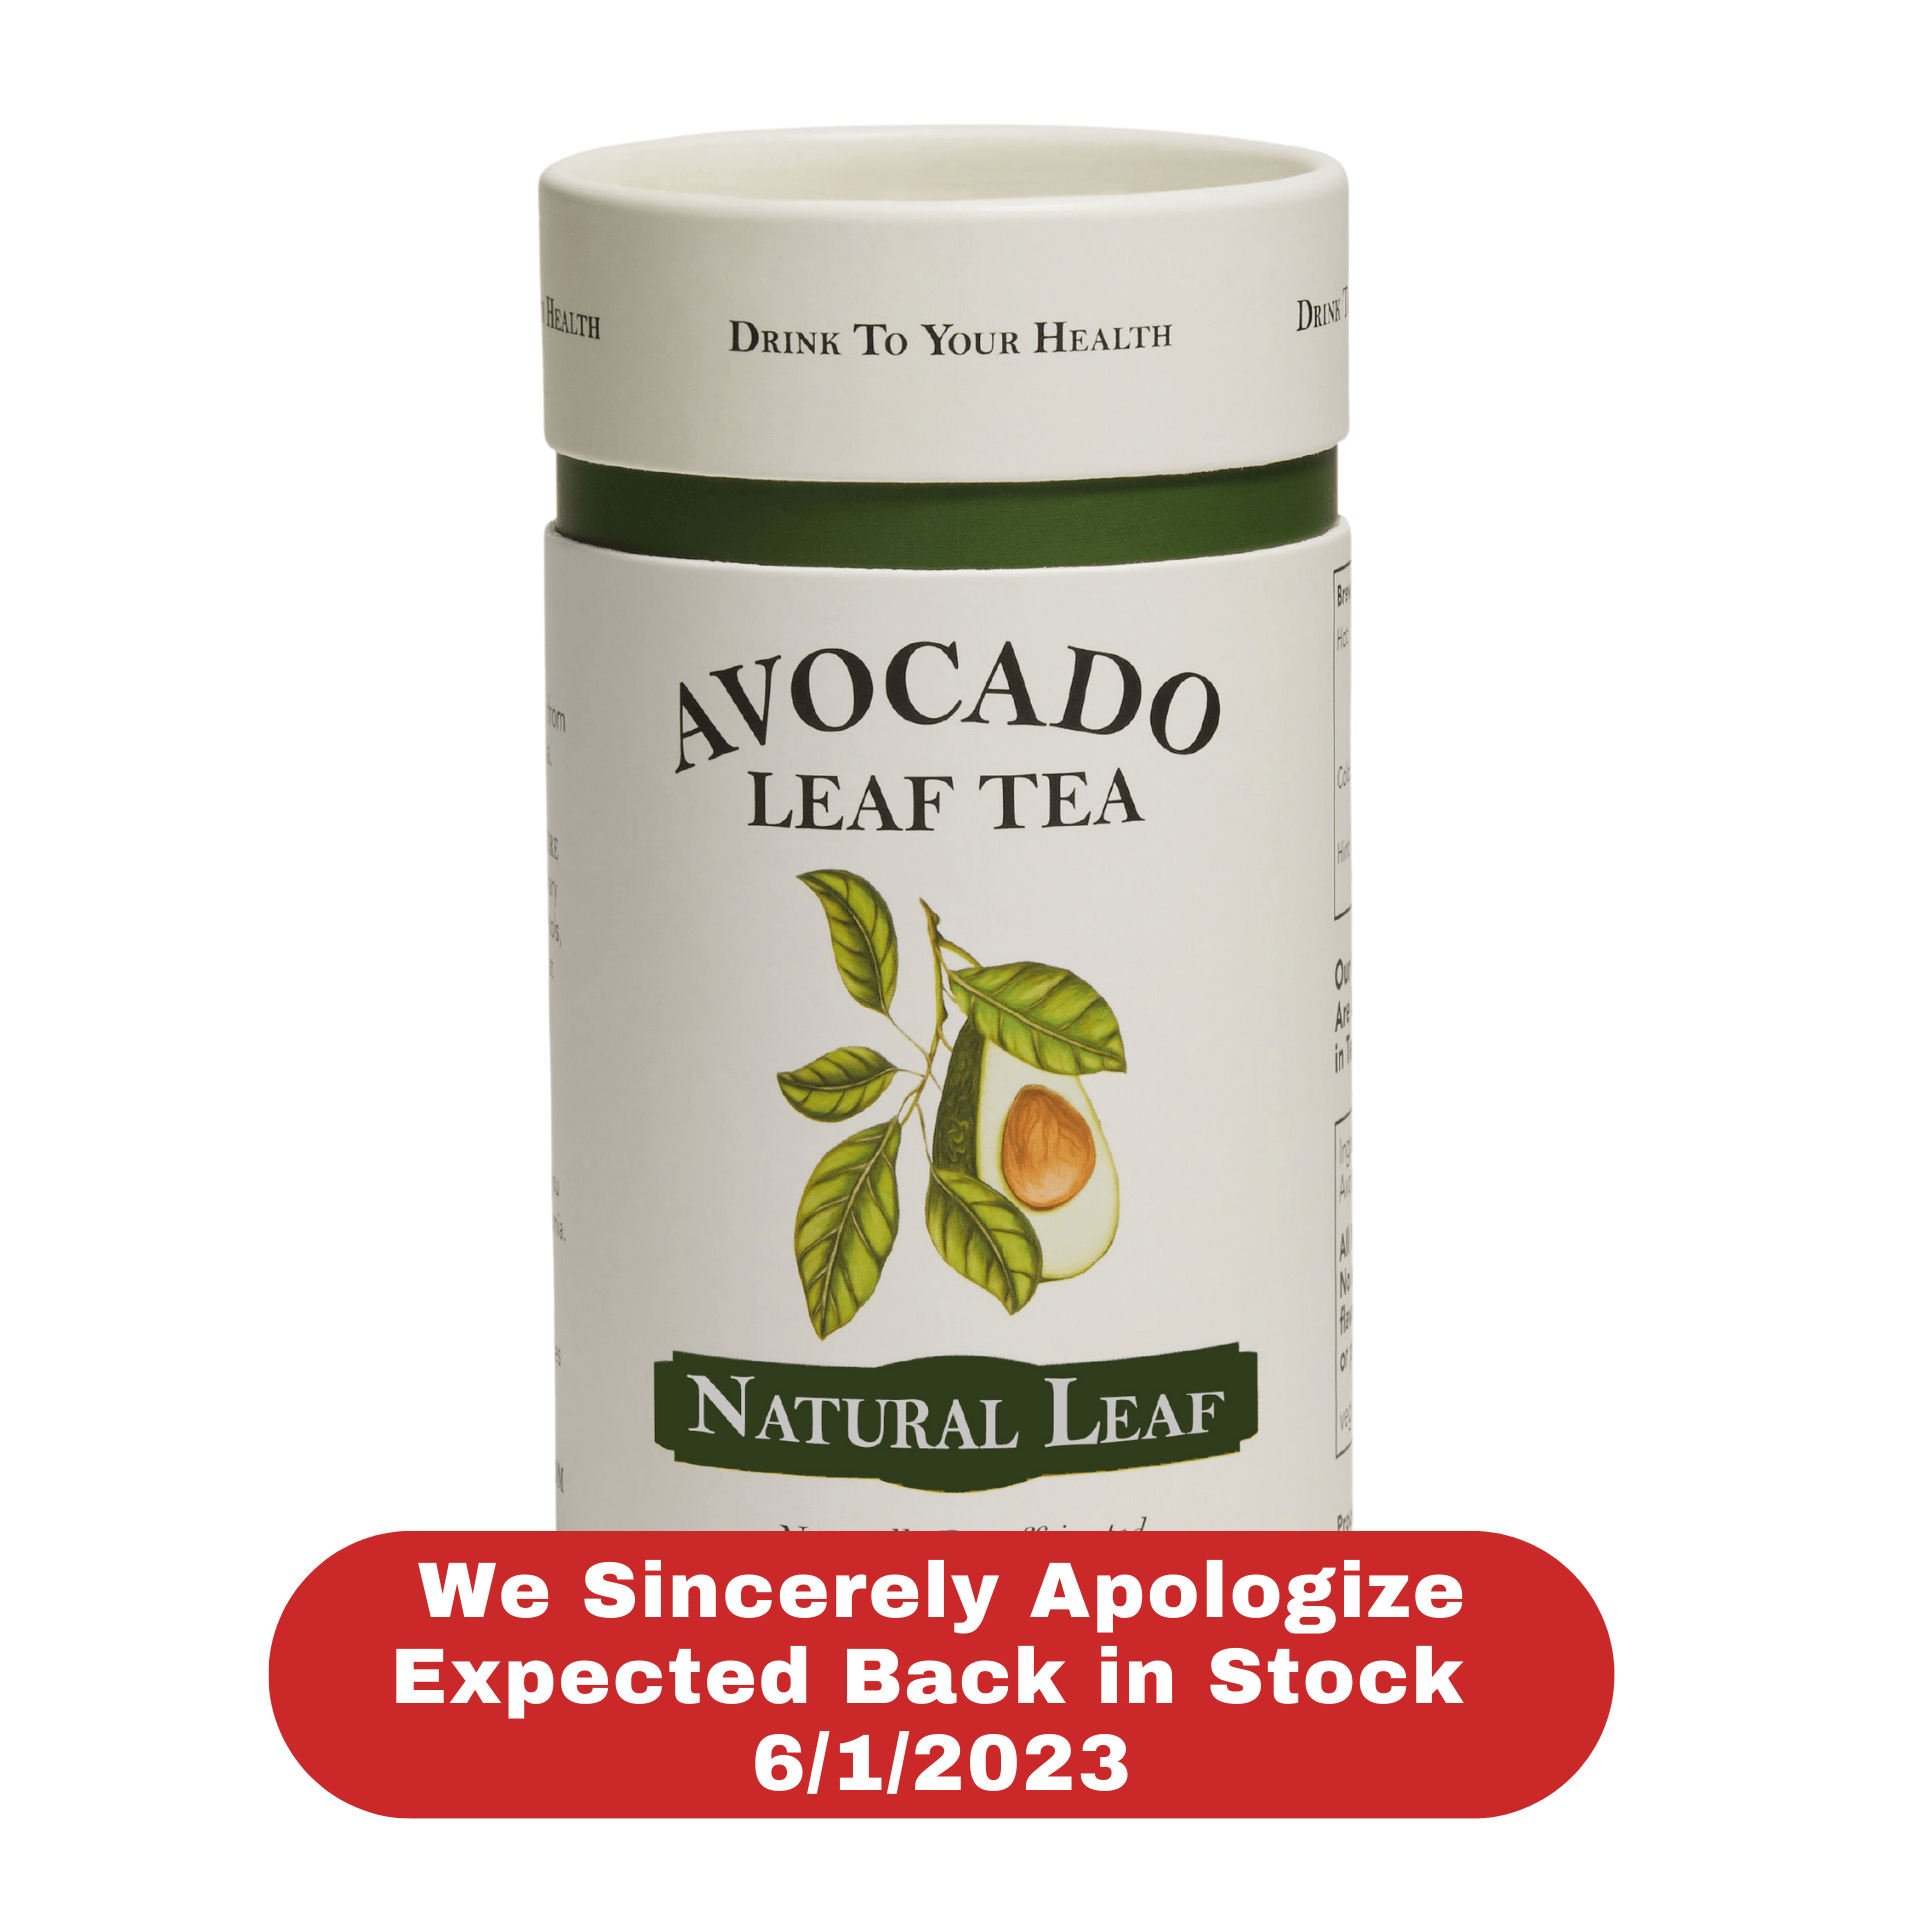 Sorry we are out of stock on canisters but will send 15 tea sachets as a replacement for you, healthy avocado leaf tea